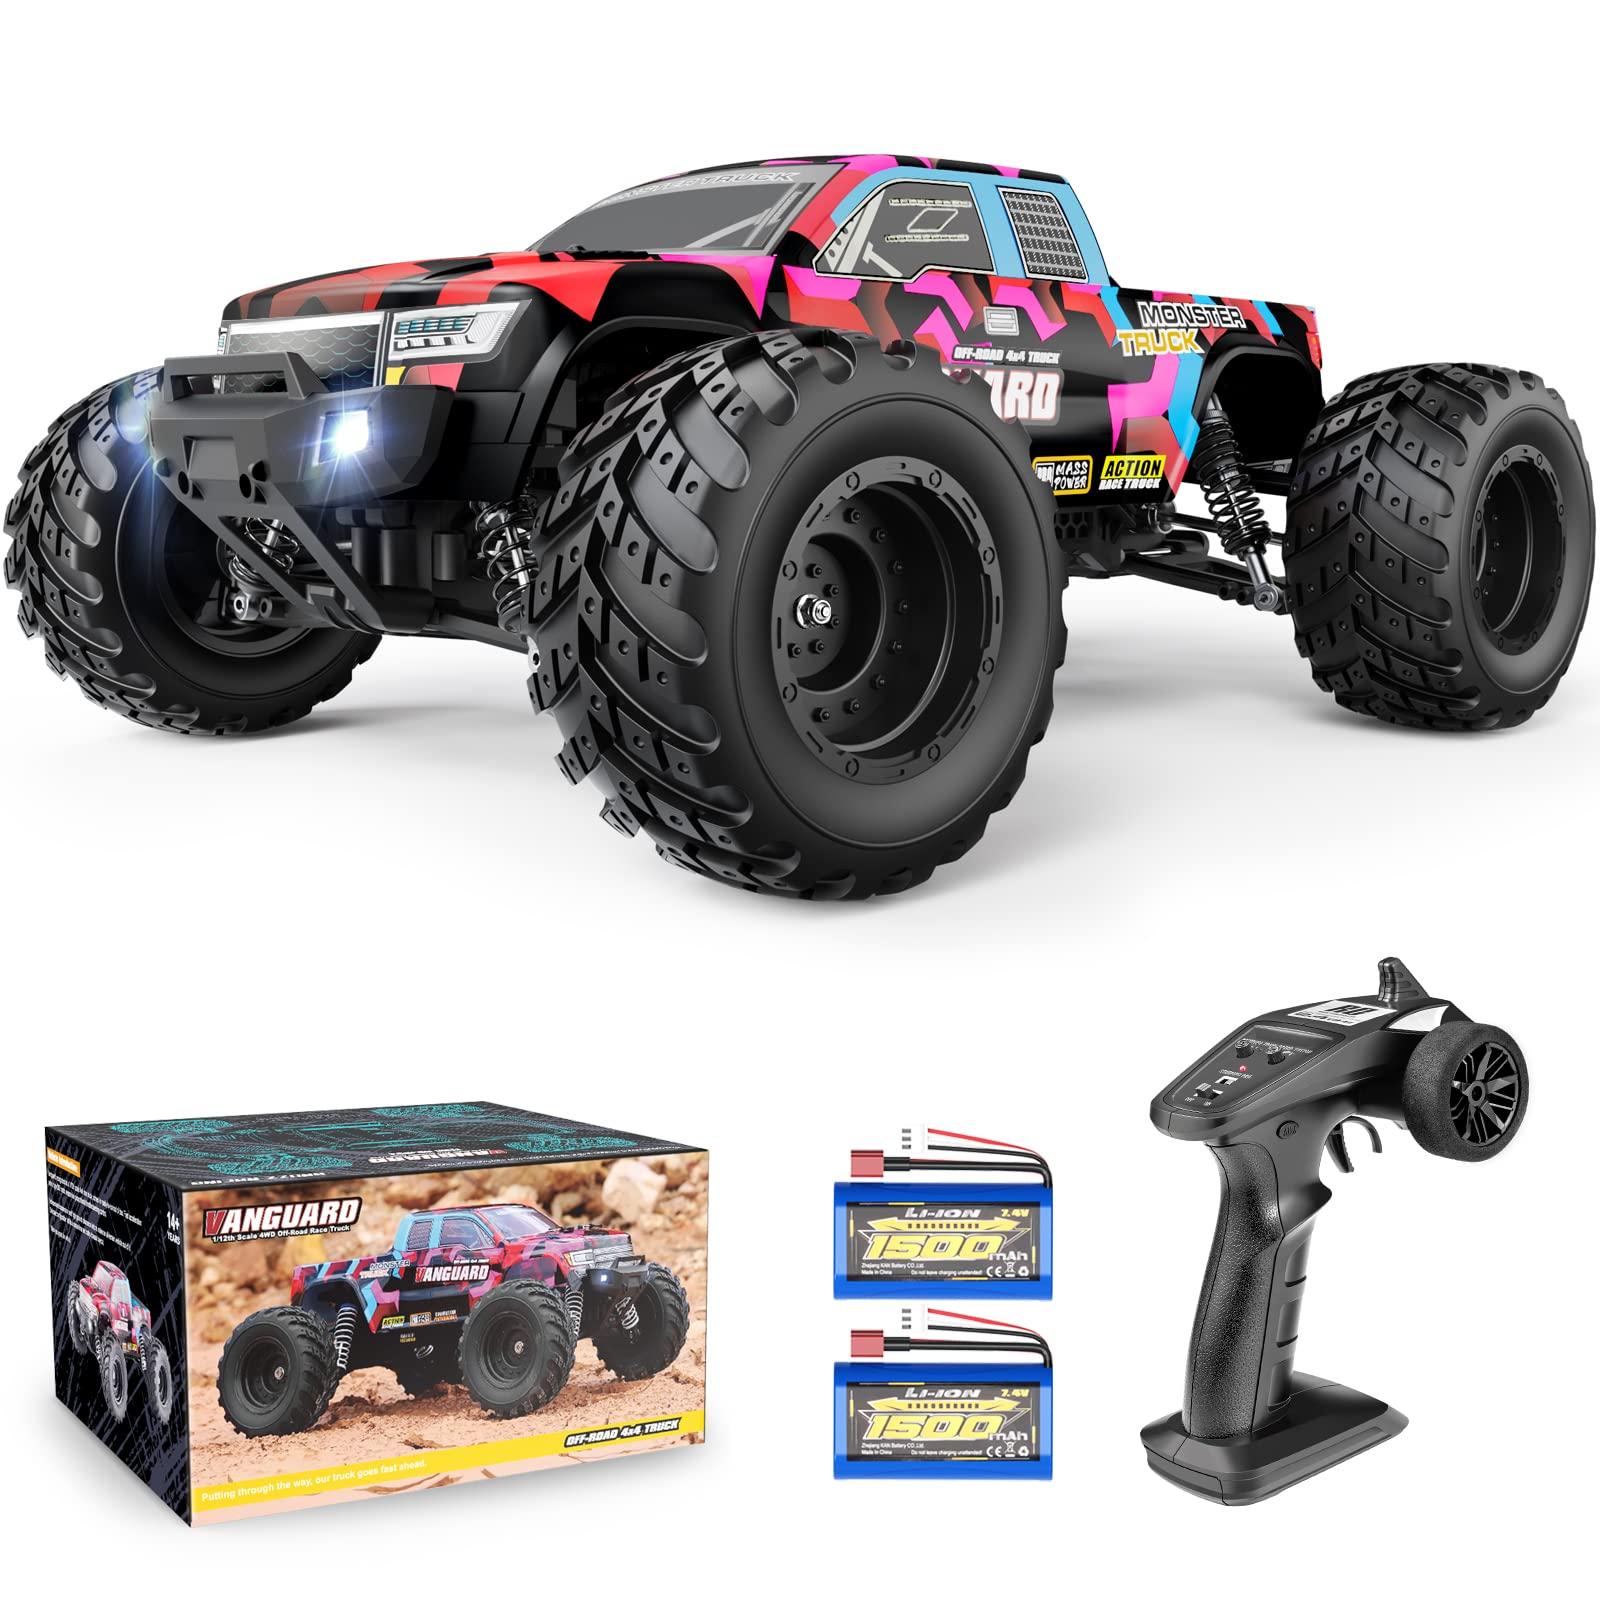 Rc Monster Truck Remote Control: Benefits of Playing with RC Monster Truck Remote Control